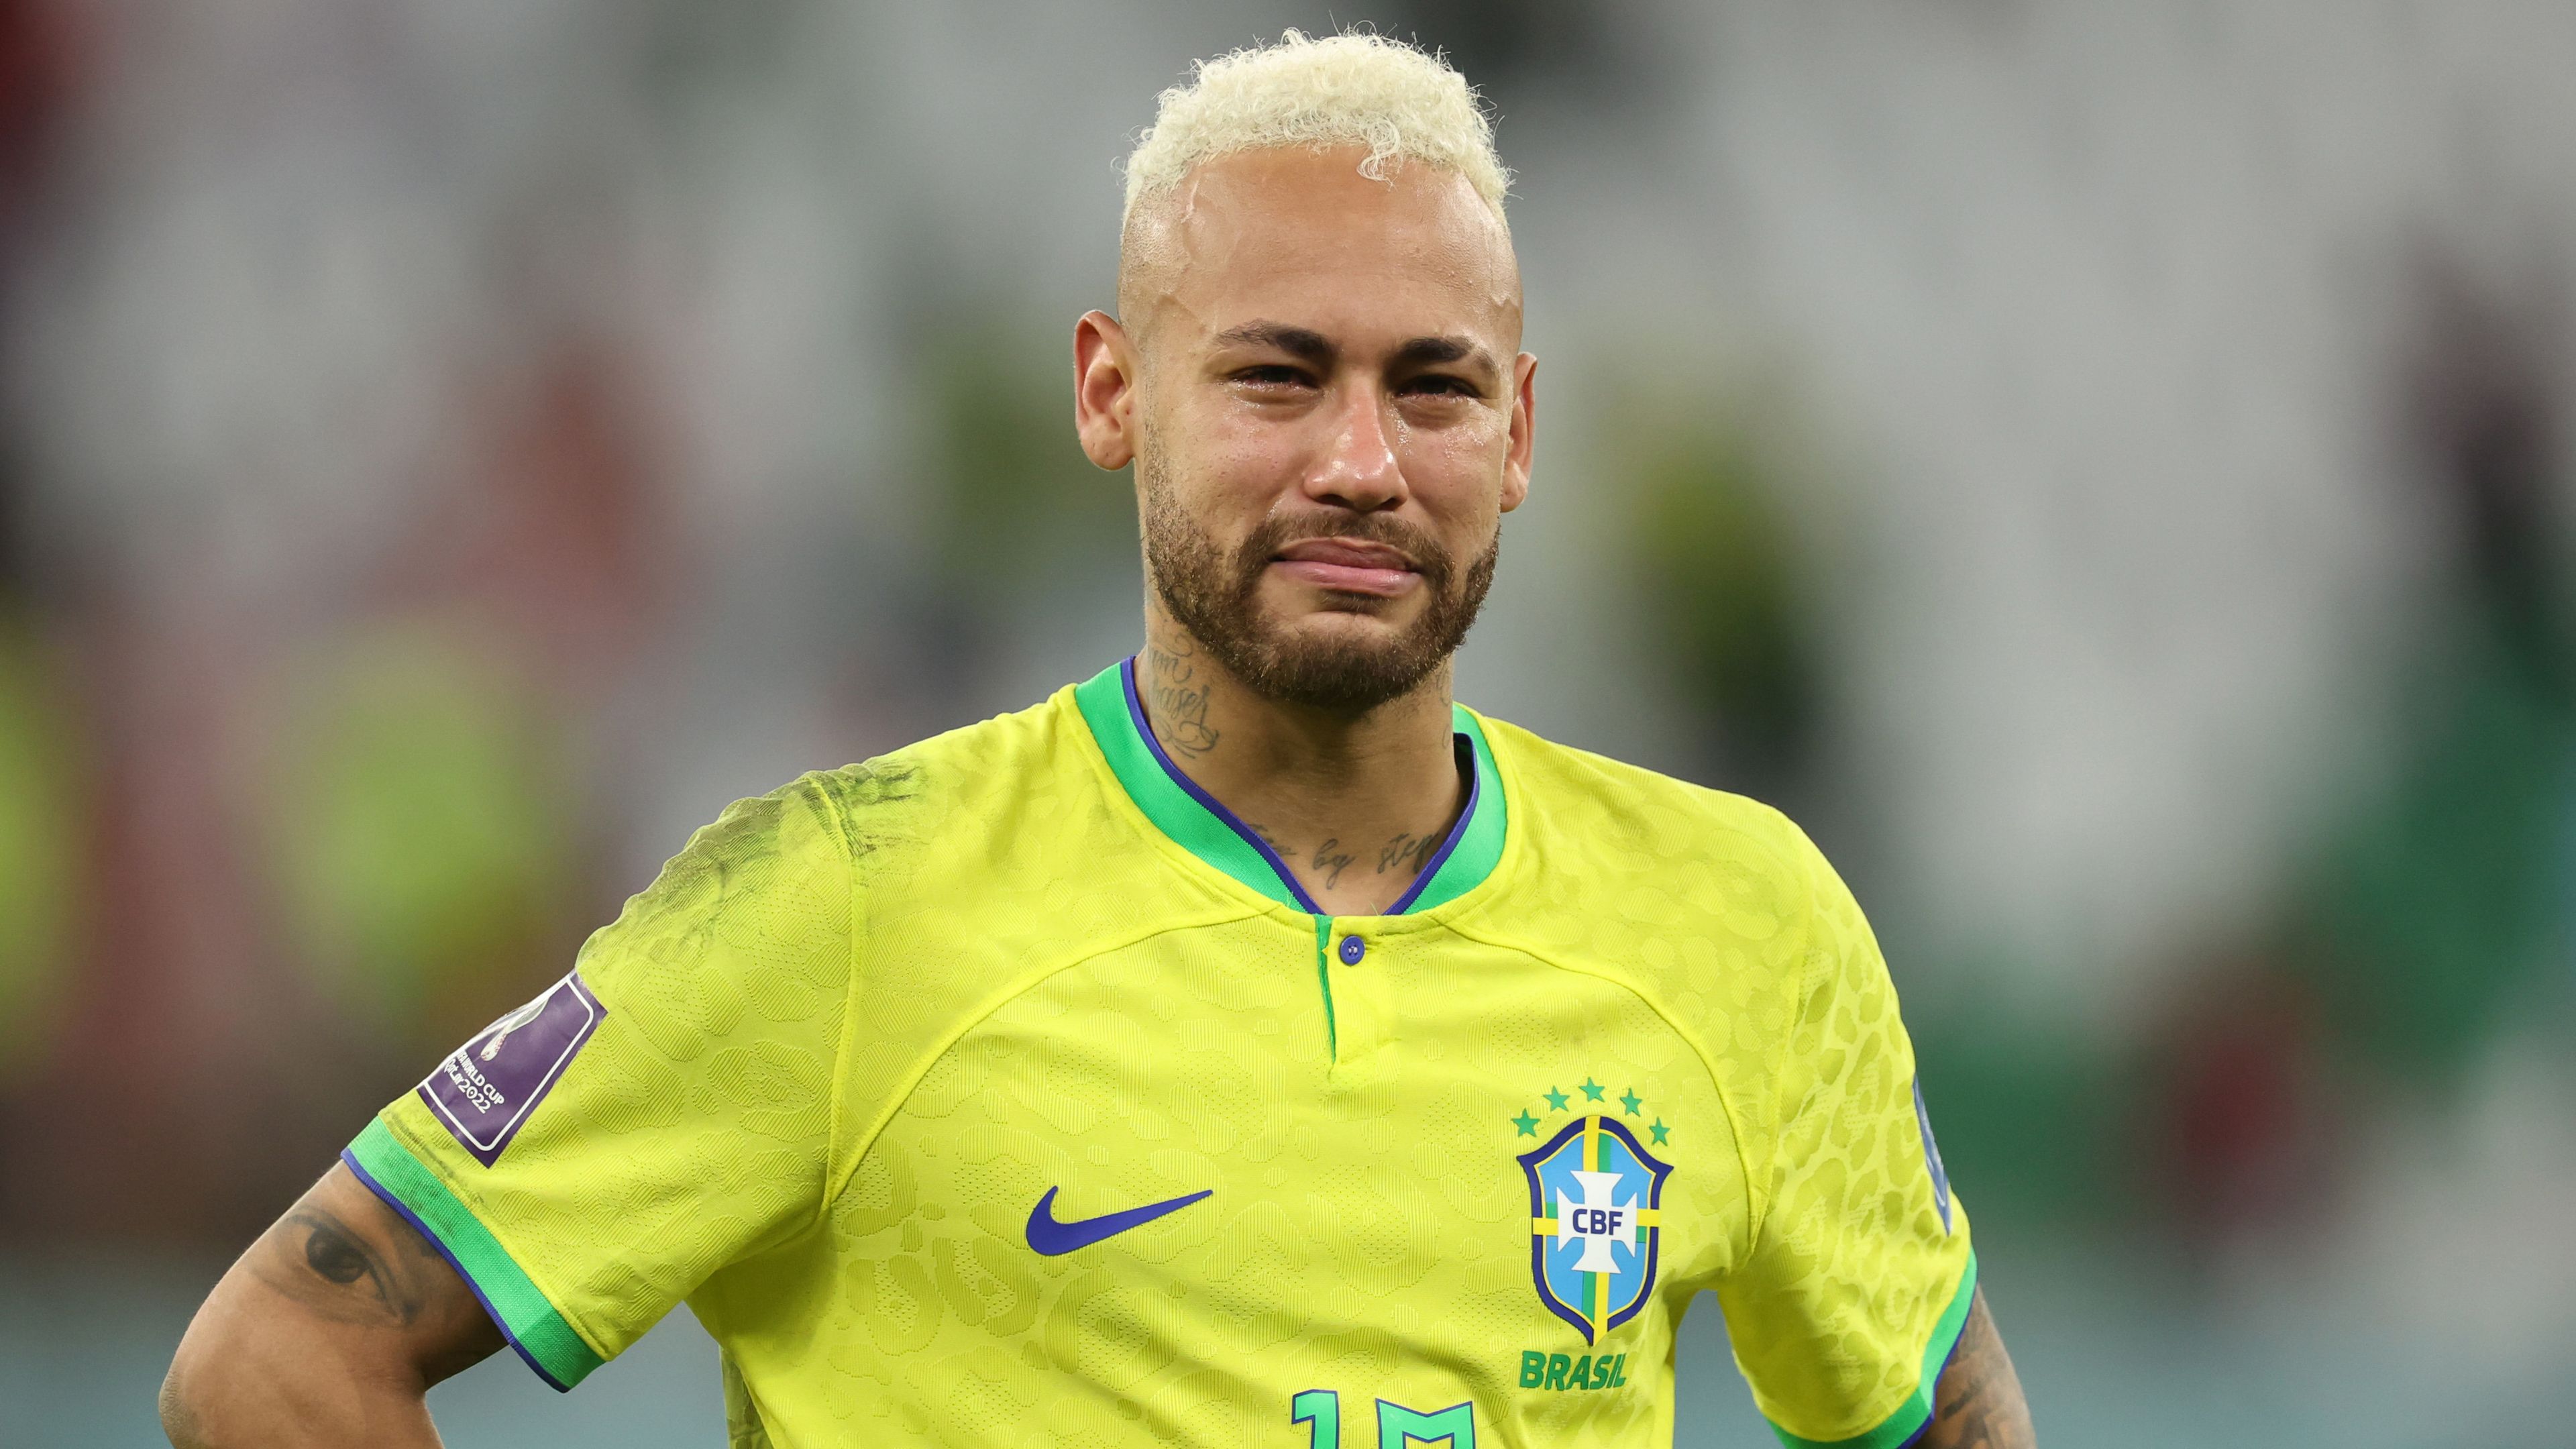 An emotional Neymar of Brazil crying after losing on penalties and being eliminated during the FIFA World Cup Qatar 2022 quarter final match between Croatia and Brazil at Education City Stadium on December 9, 2022 in Al Rayyan, Qatar. (Photo by Matthew Ashton - AMA/Getty Images)